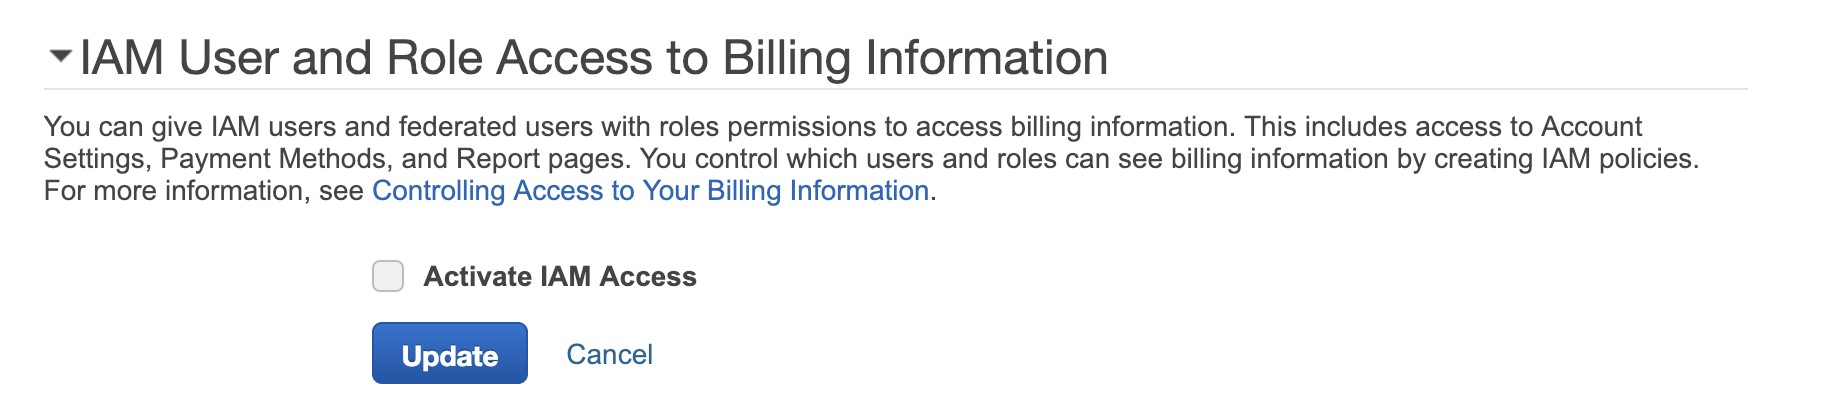 ~ IAM User and Role Access to Billing Information

You can give IAM users and federated users with roles permissions to access billing information. This includes access to Account
Settings, Payment Methods, and Report pages. You control which users and roles can see billing information by creating IAM policies.
For more information, see Controlling Access to Your Billing Information.

Activate IAM Access

Update Cancel